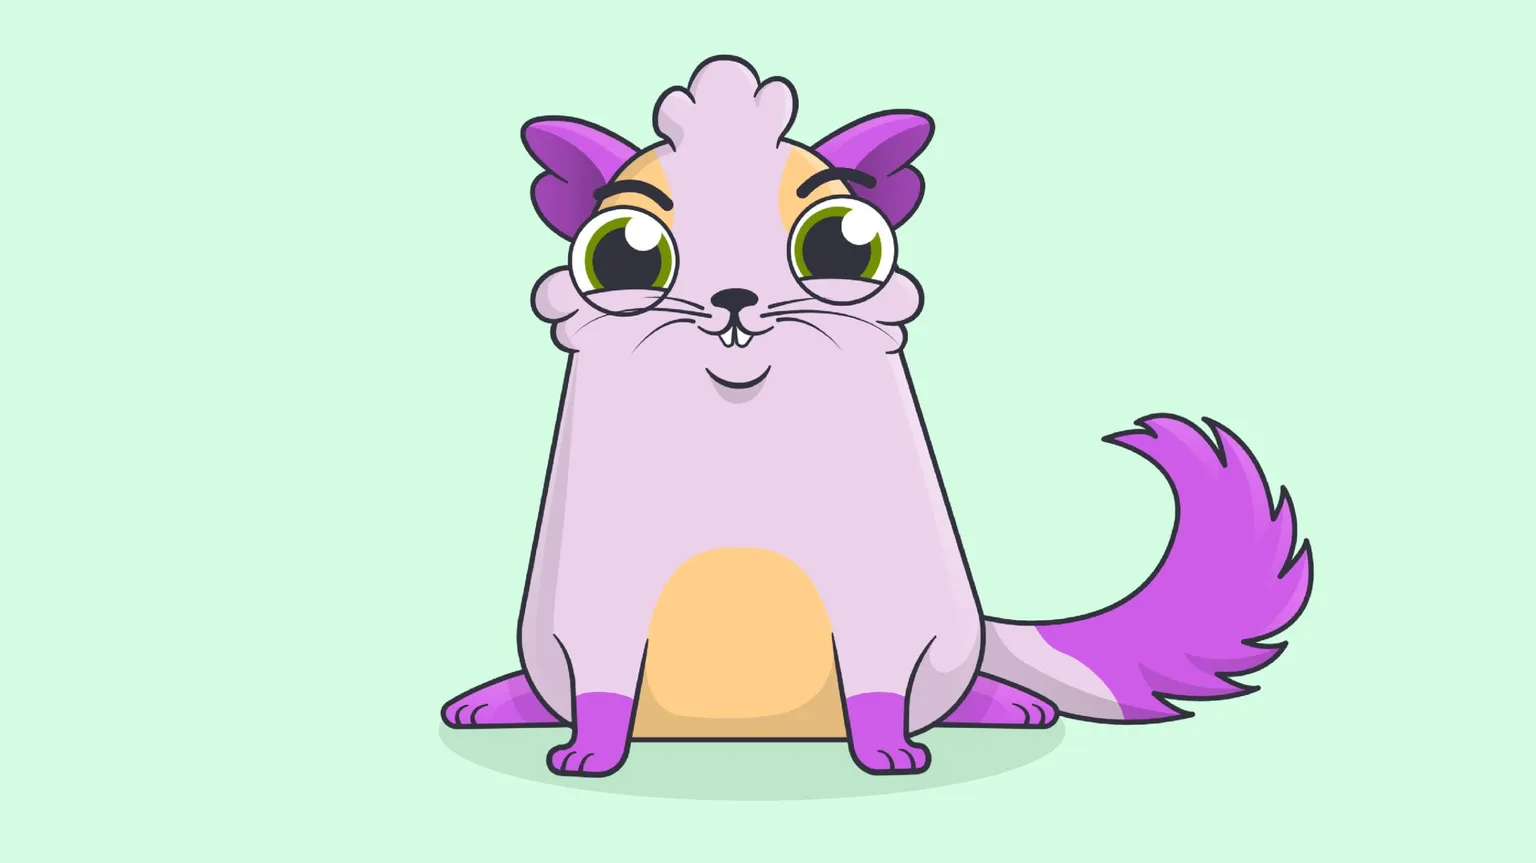 CryptoKitties were the darlings of the Ethereum blockchain in late 2017. Image: Dapper Labs.